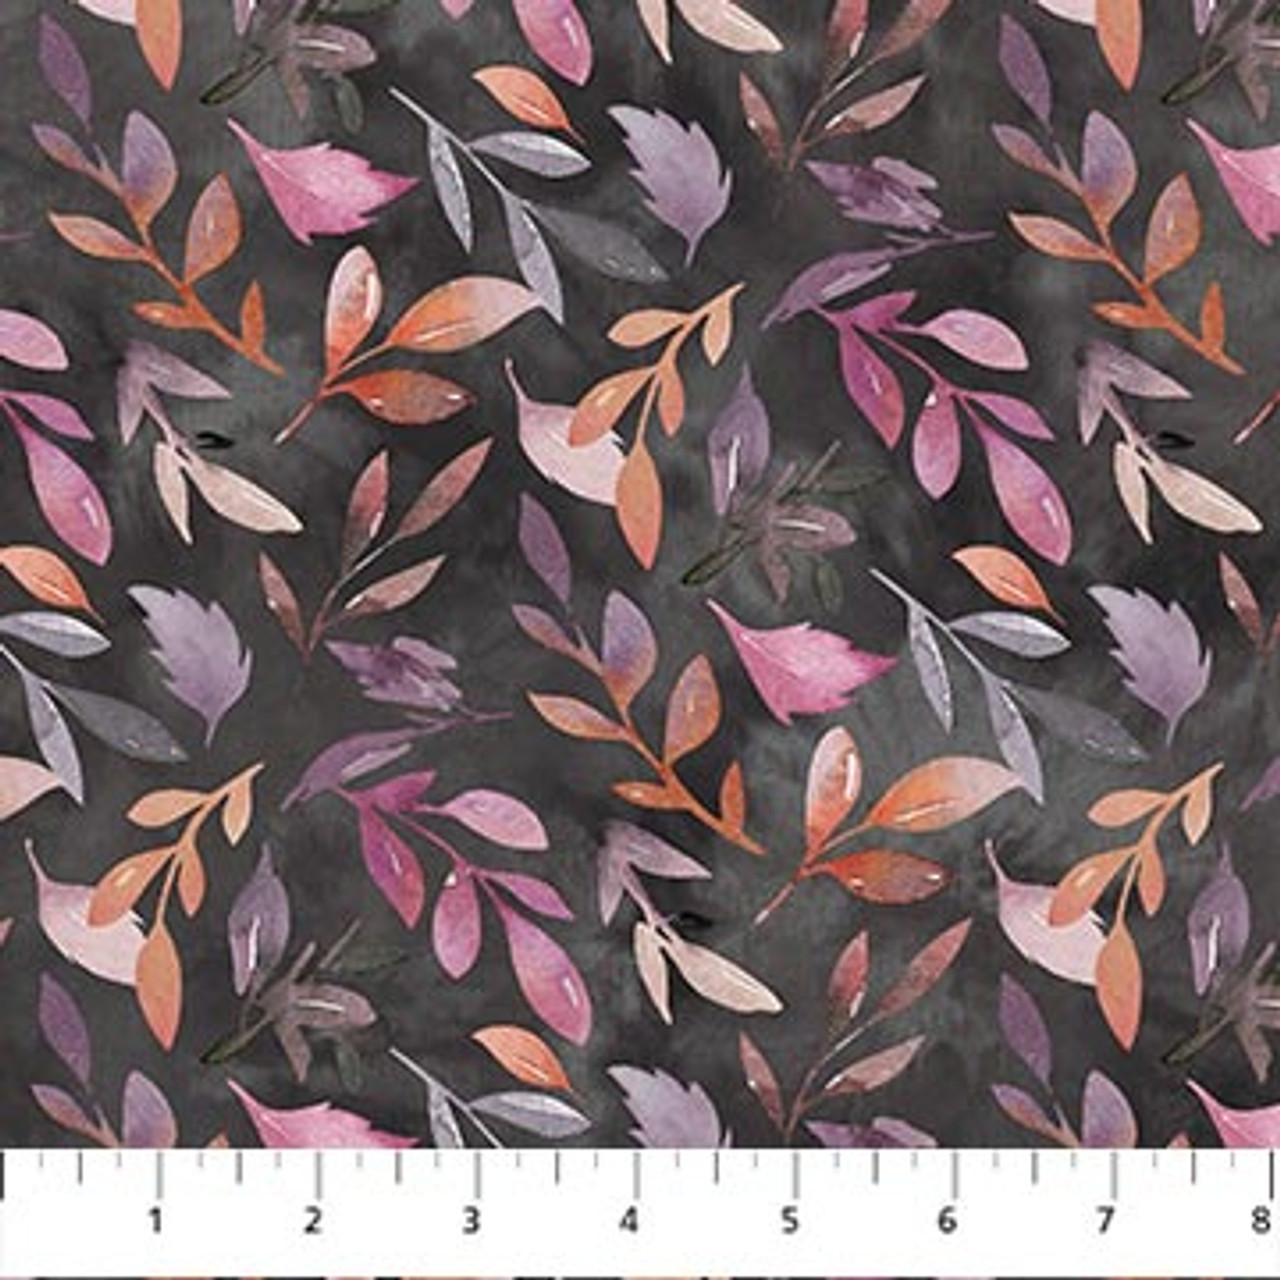 Flora & Foliage Coordinating Thread Collection